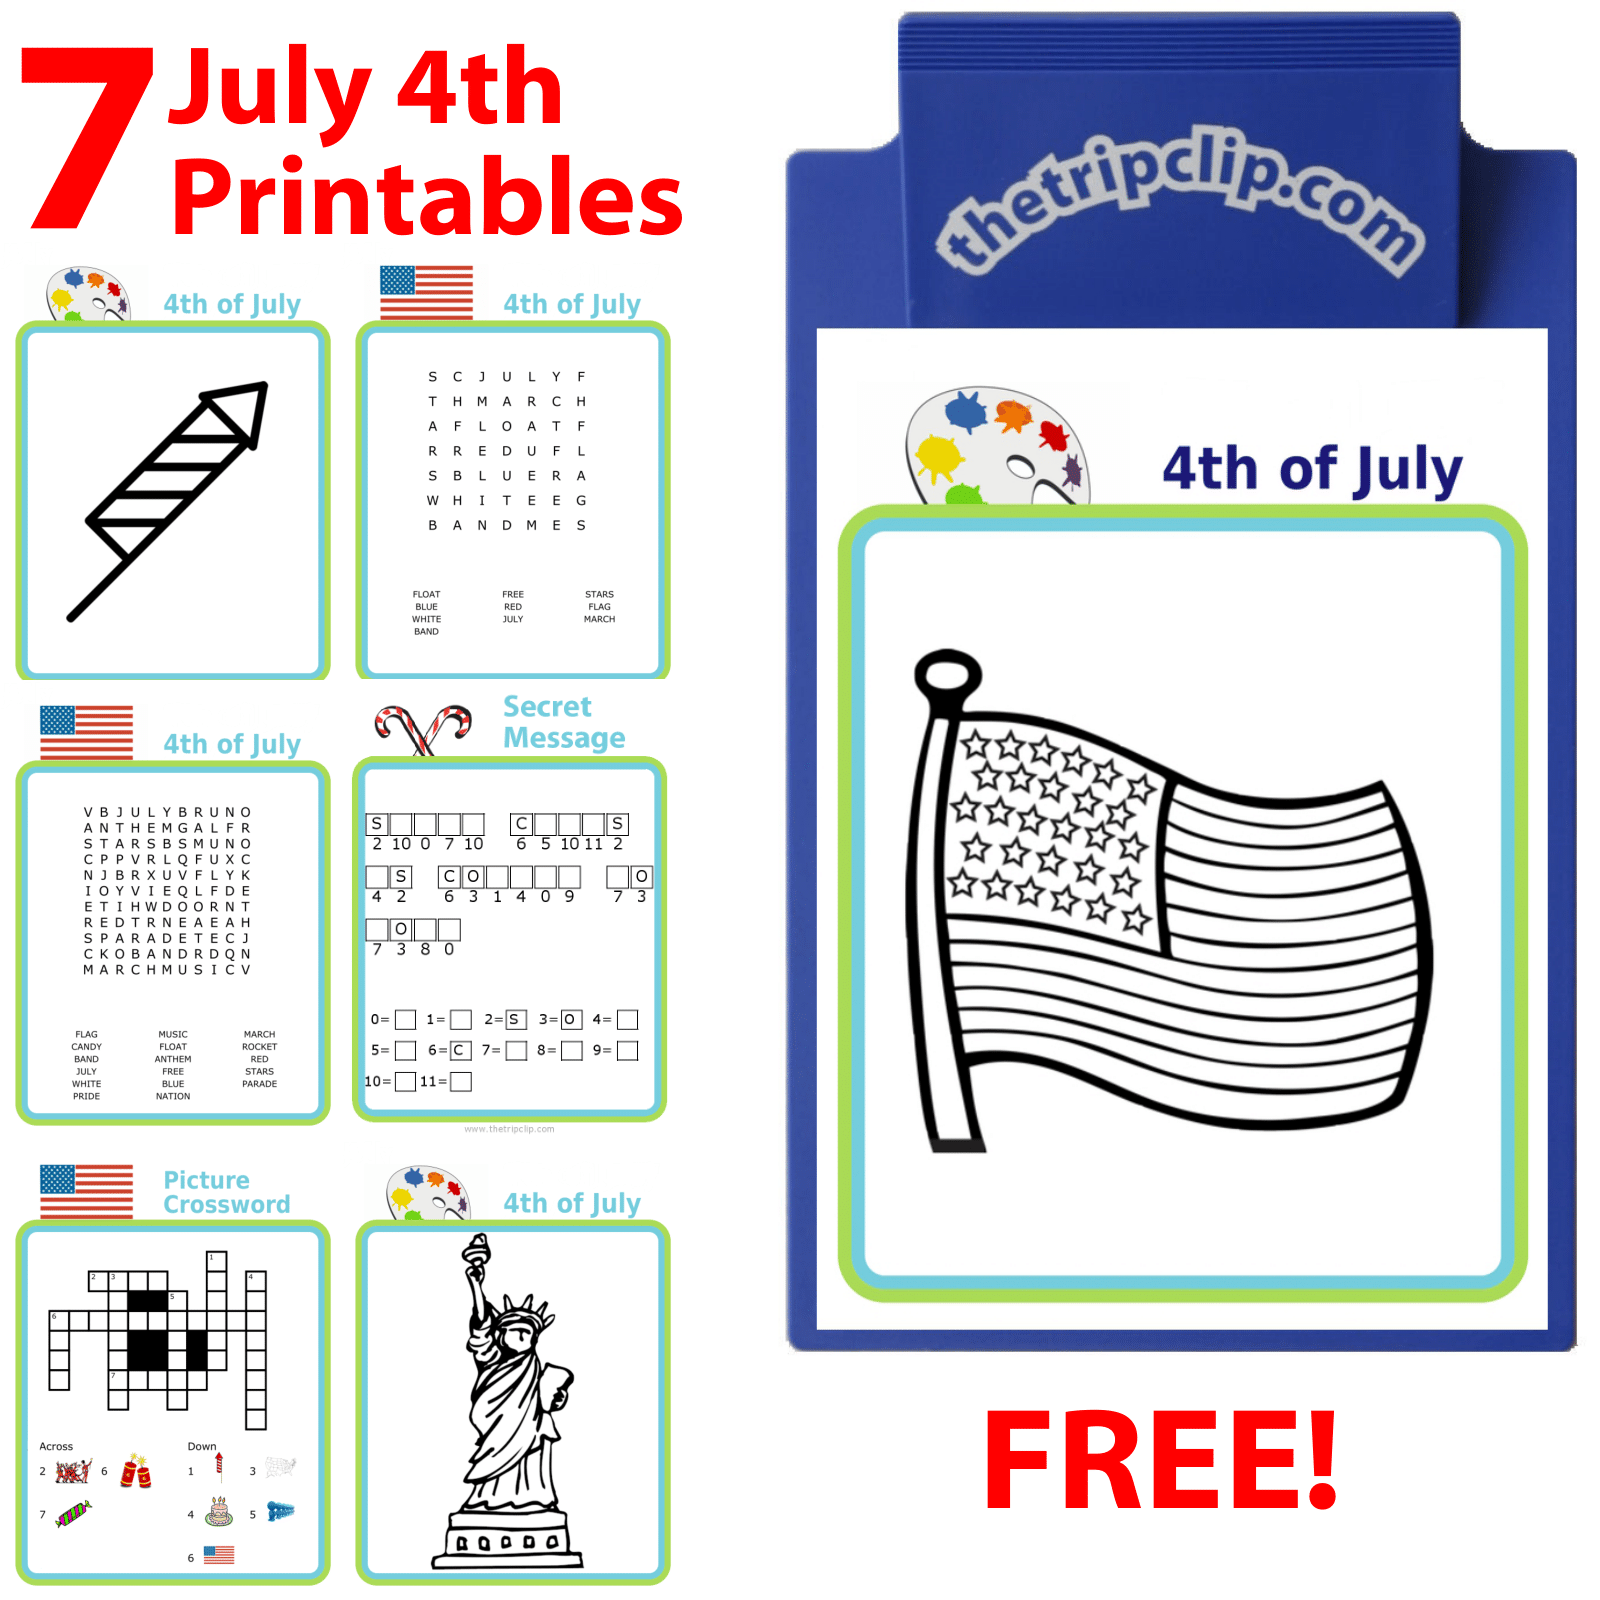 4th of July coloring,word search, and secret message puzzles